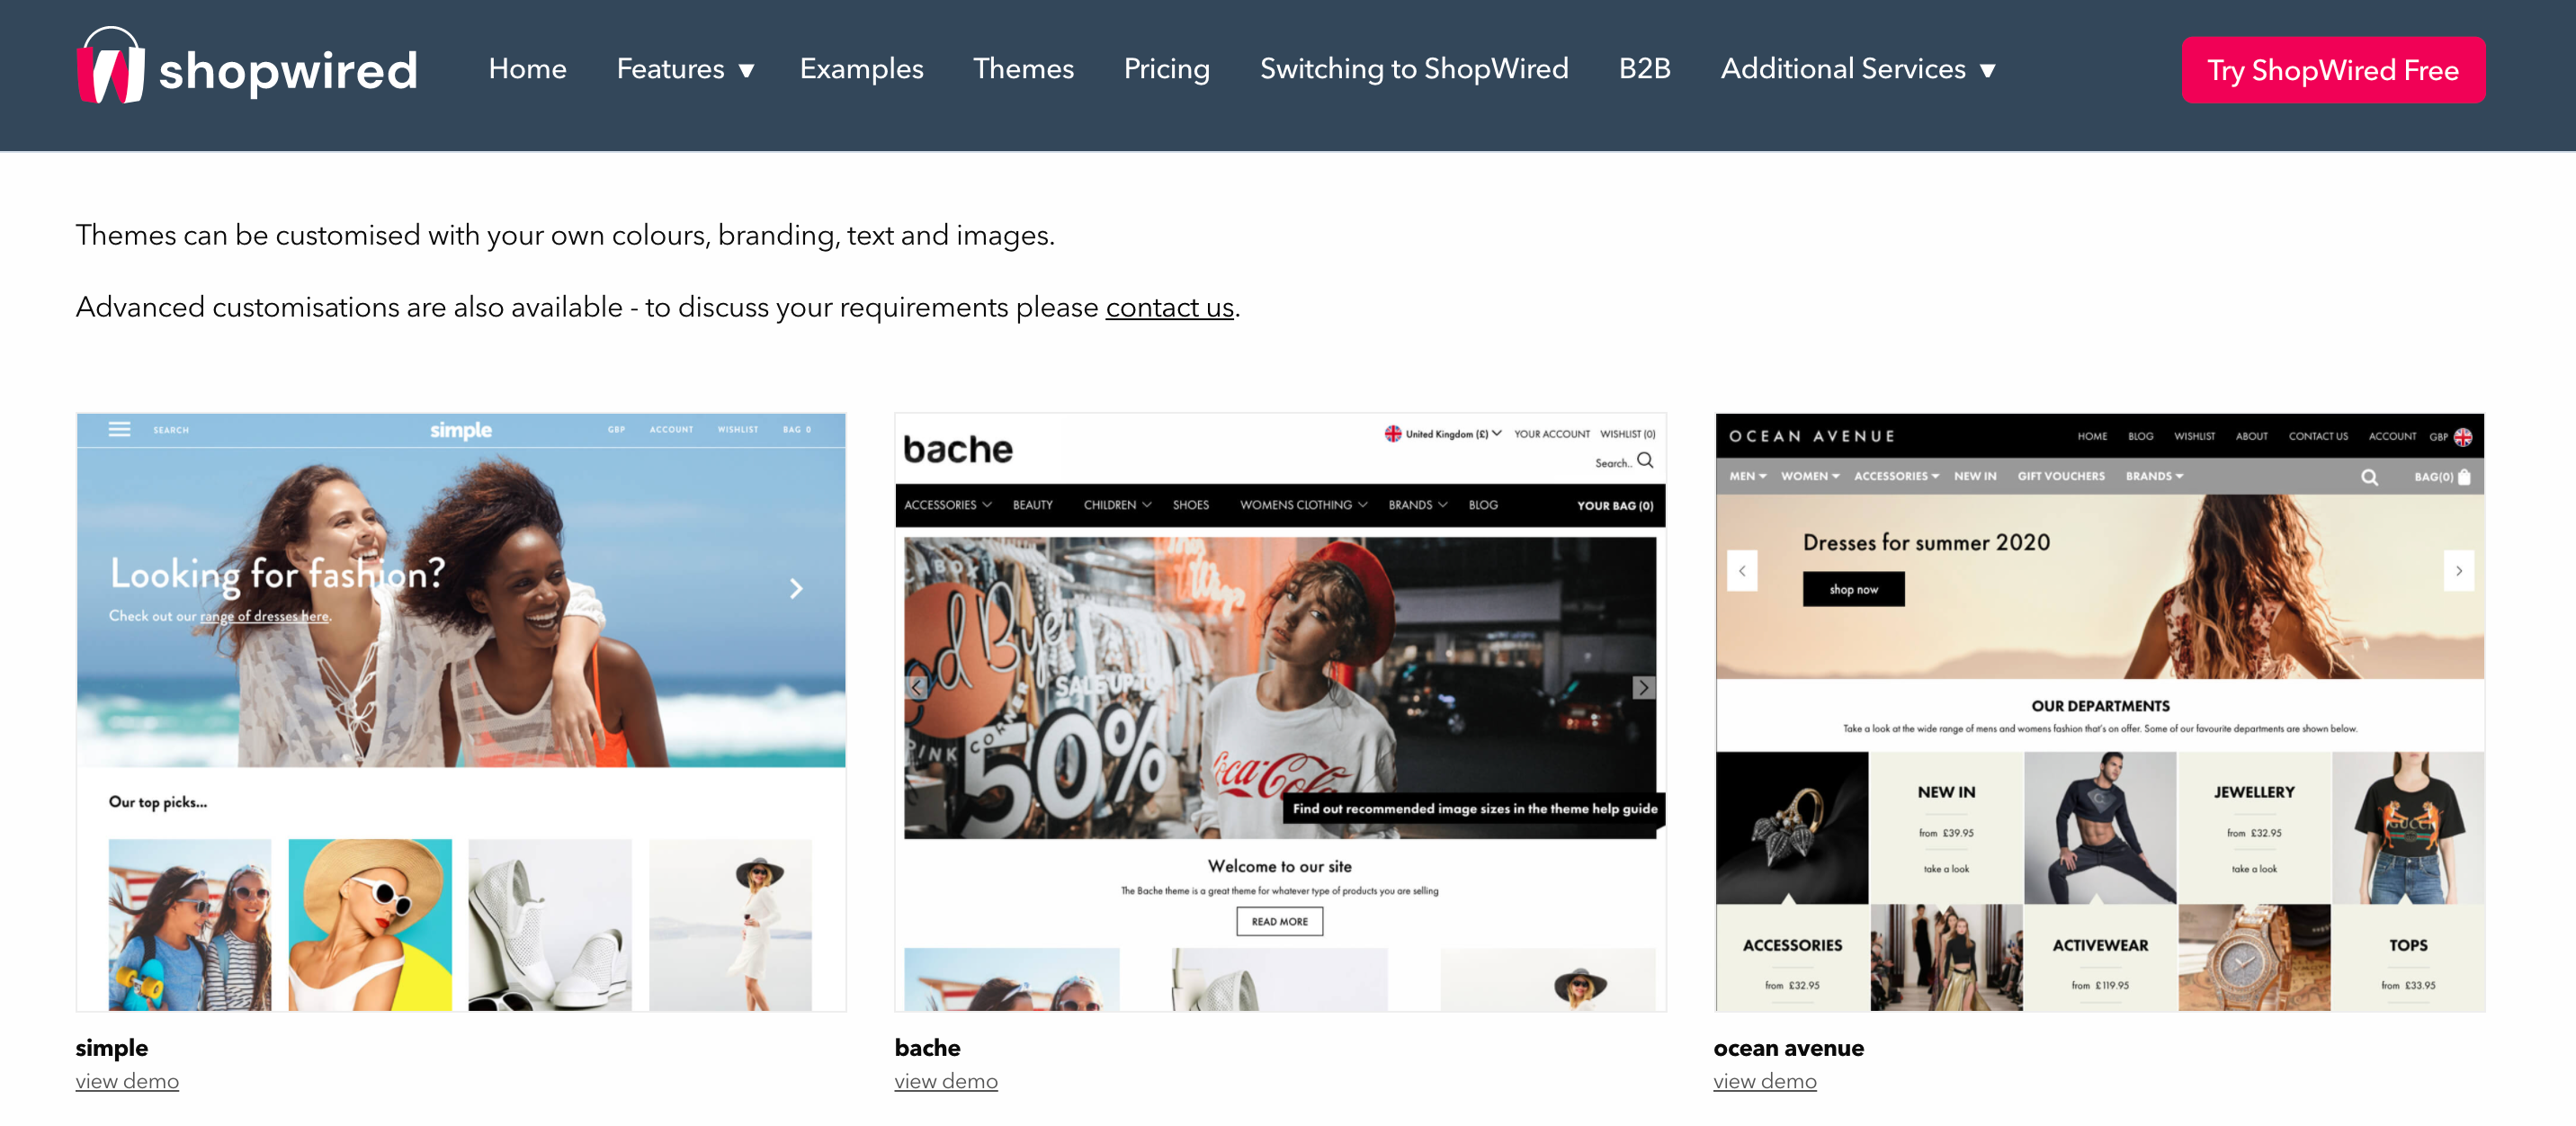 shopwired's ecommerce themes